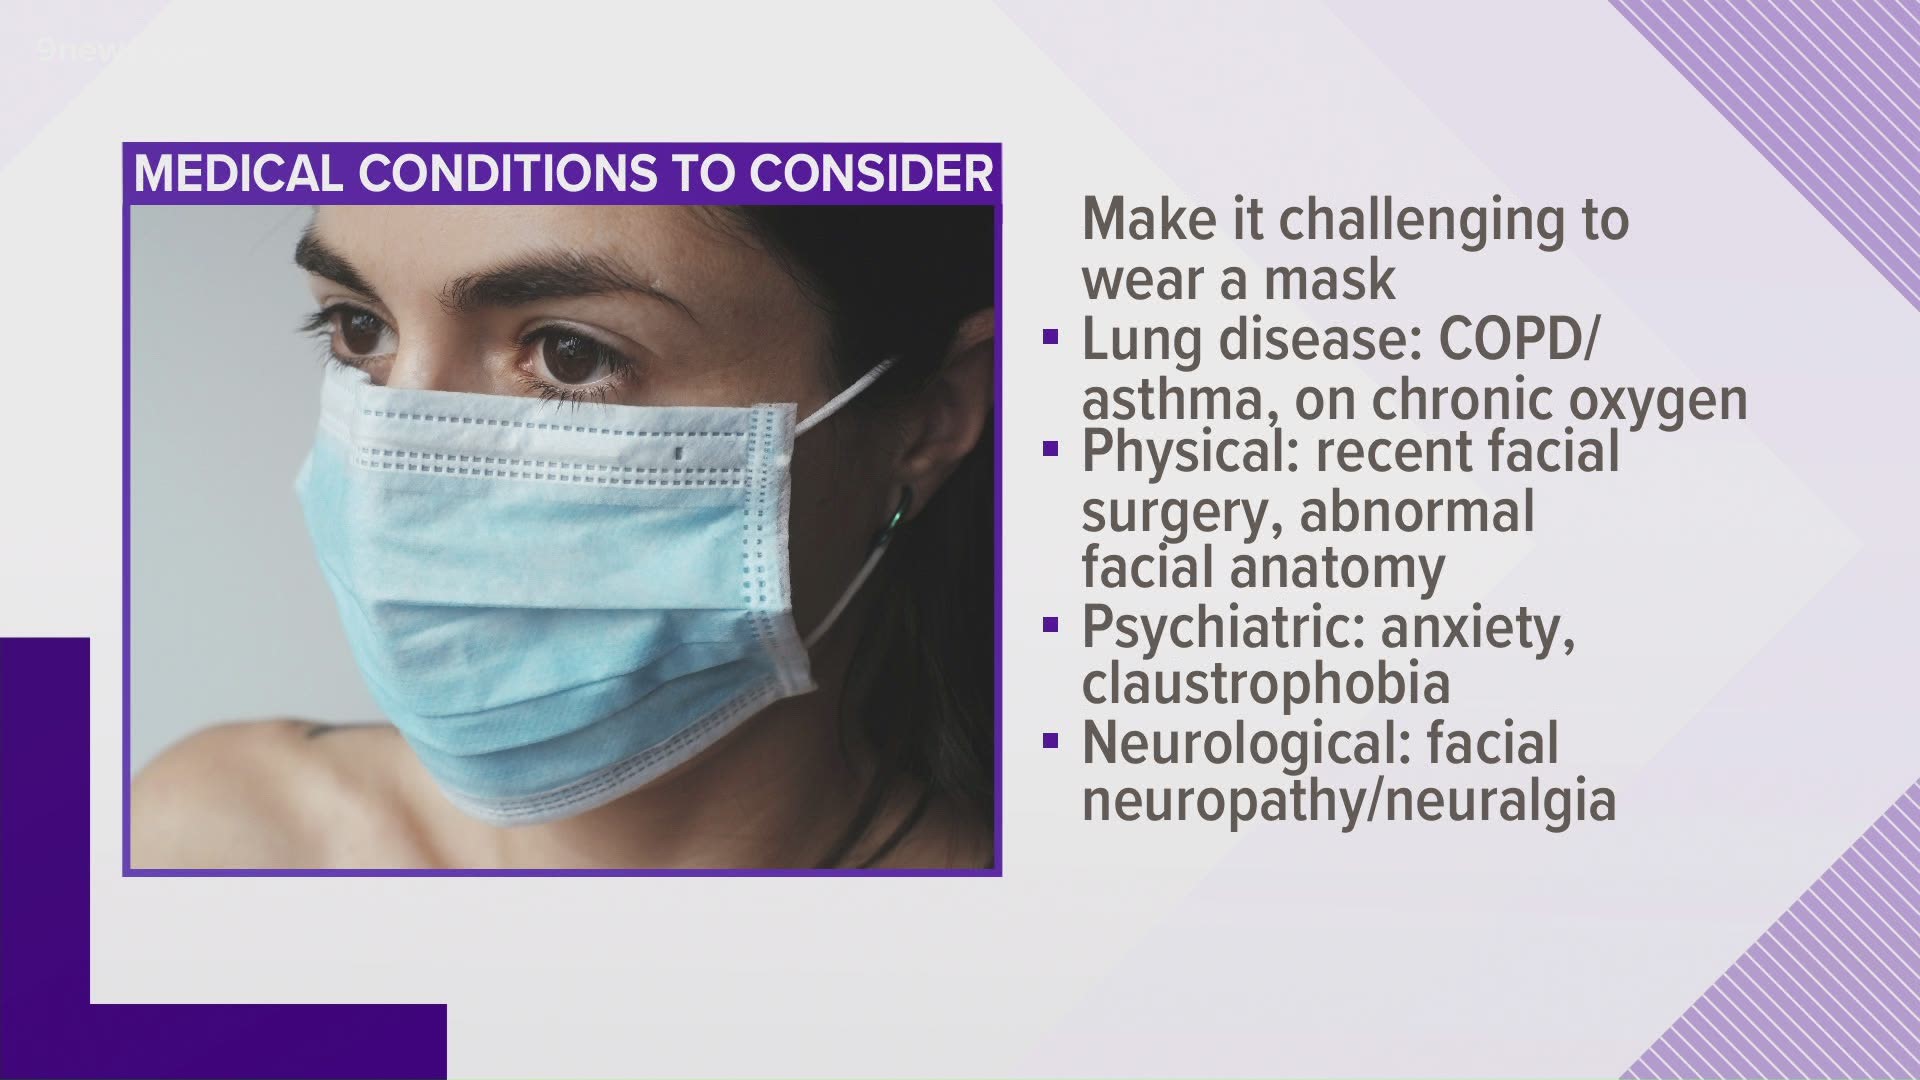 Face masks have been mandated across Colorado, except for people who are medically exempt. Dr. Payal Kohli has an example of what makes them exempt.